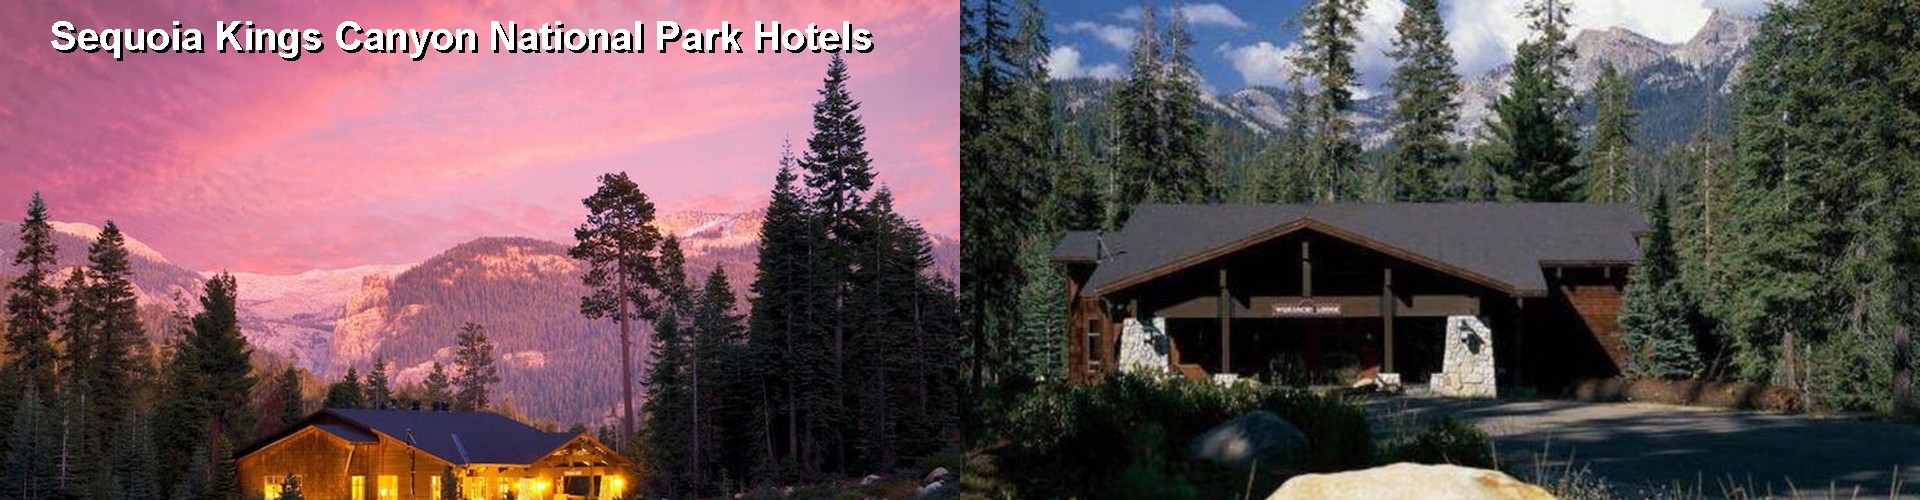 4 Best Hotels near Sequoia Kings Canyon National Park